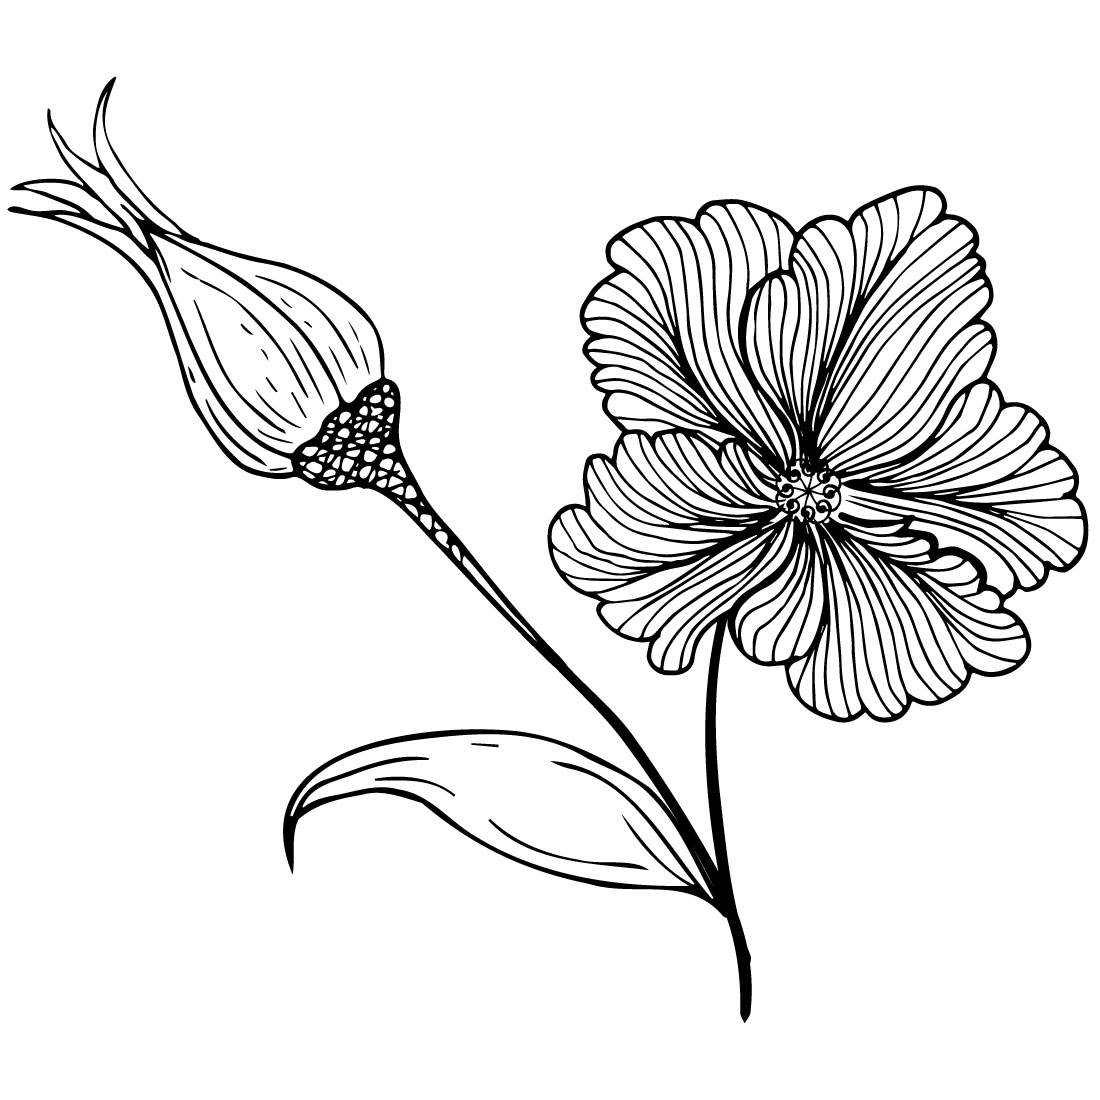 Big flower in a hand drawn style.